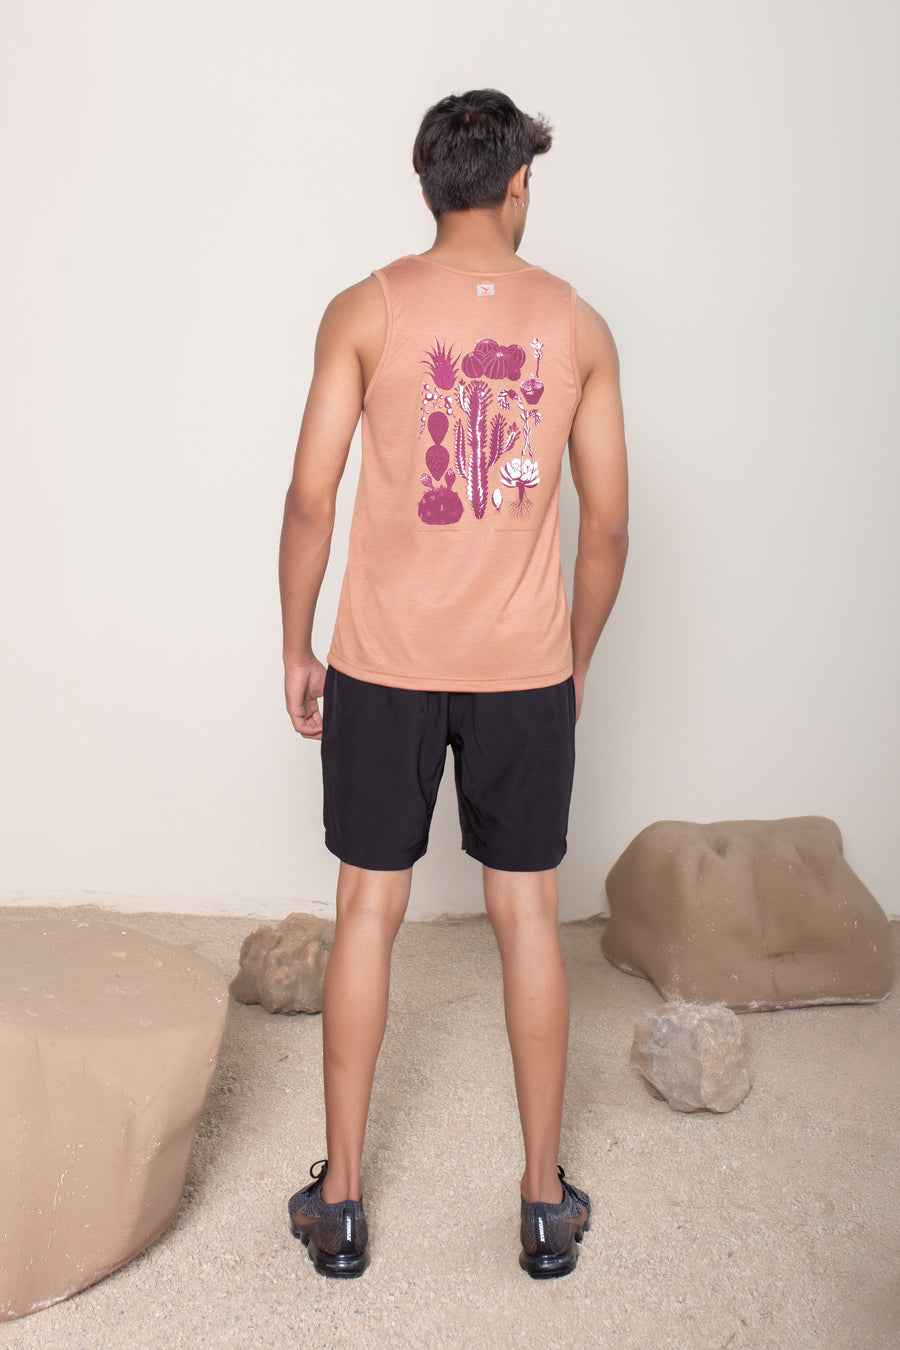 Men's Solo Bamboo Tank Brick Cactus | VOLO Apparel | Made with a blend of bamboo fibers and a four way stretch spandex, Solo Bamboo Tank features an ultra soft tank that is full of features. The bamboo fibers are naturally odor resistant and antimicrobial, the fit is a tailored fit, each tank features a unique print.